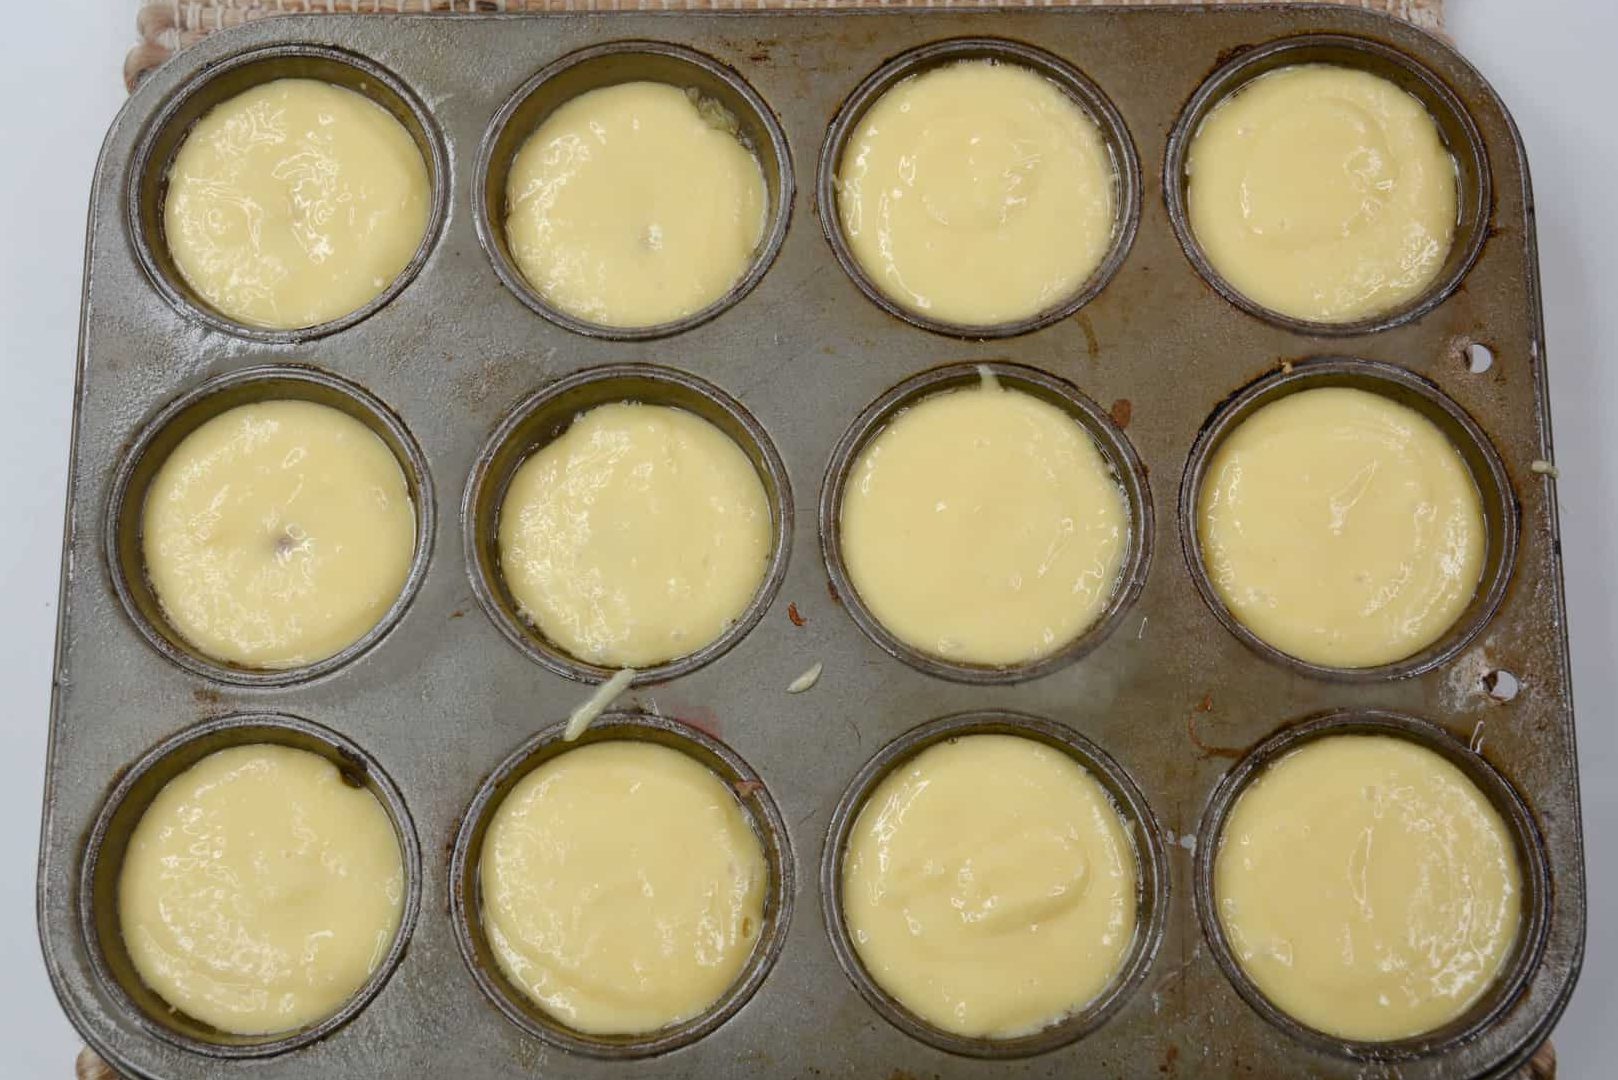 Scoop the prepared cake batter into each of the muffin wells. Fill just below the top of the muffin well. (Do not overfill.)